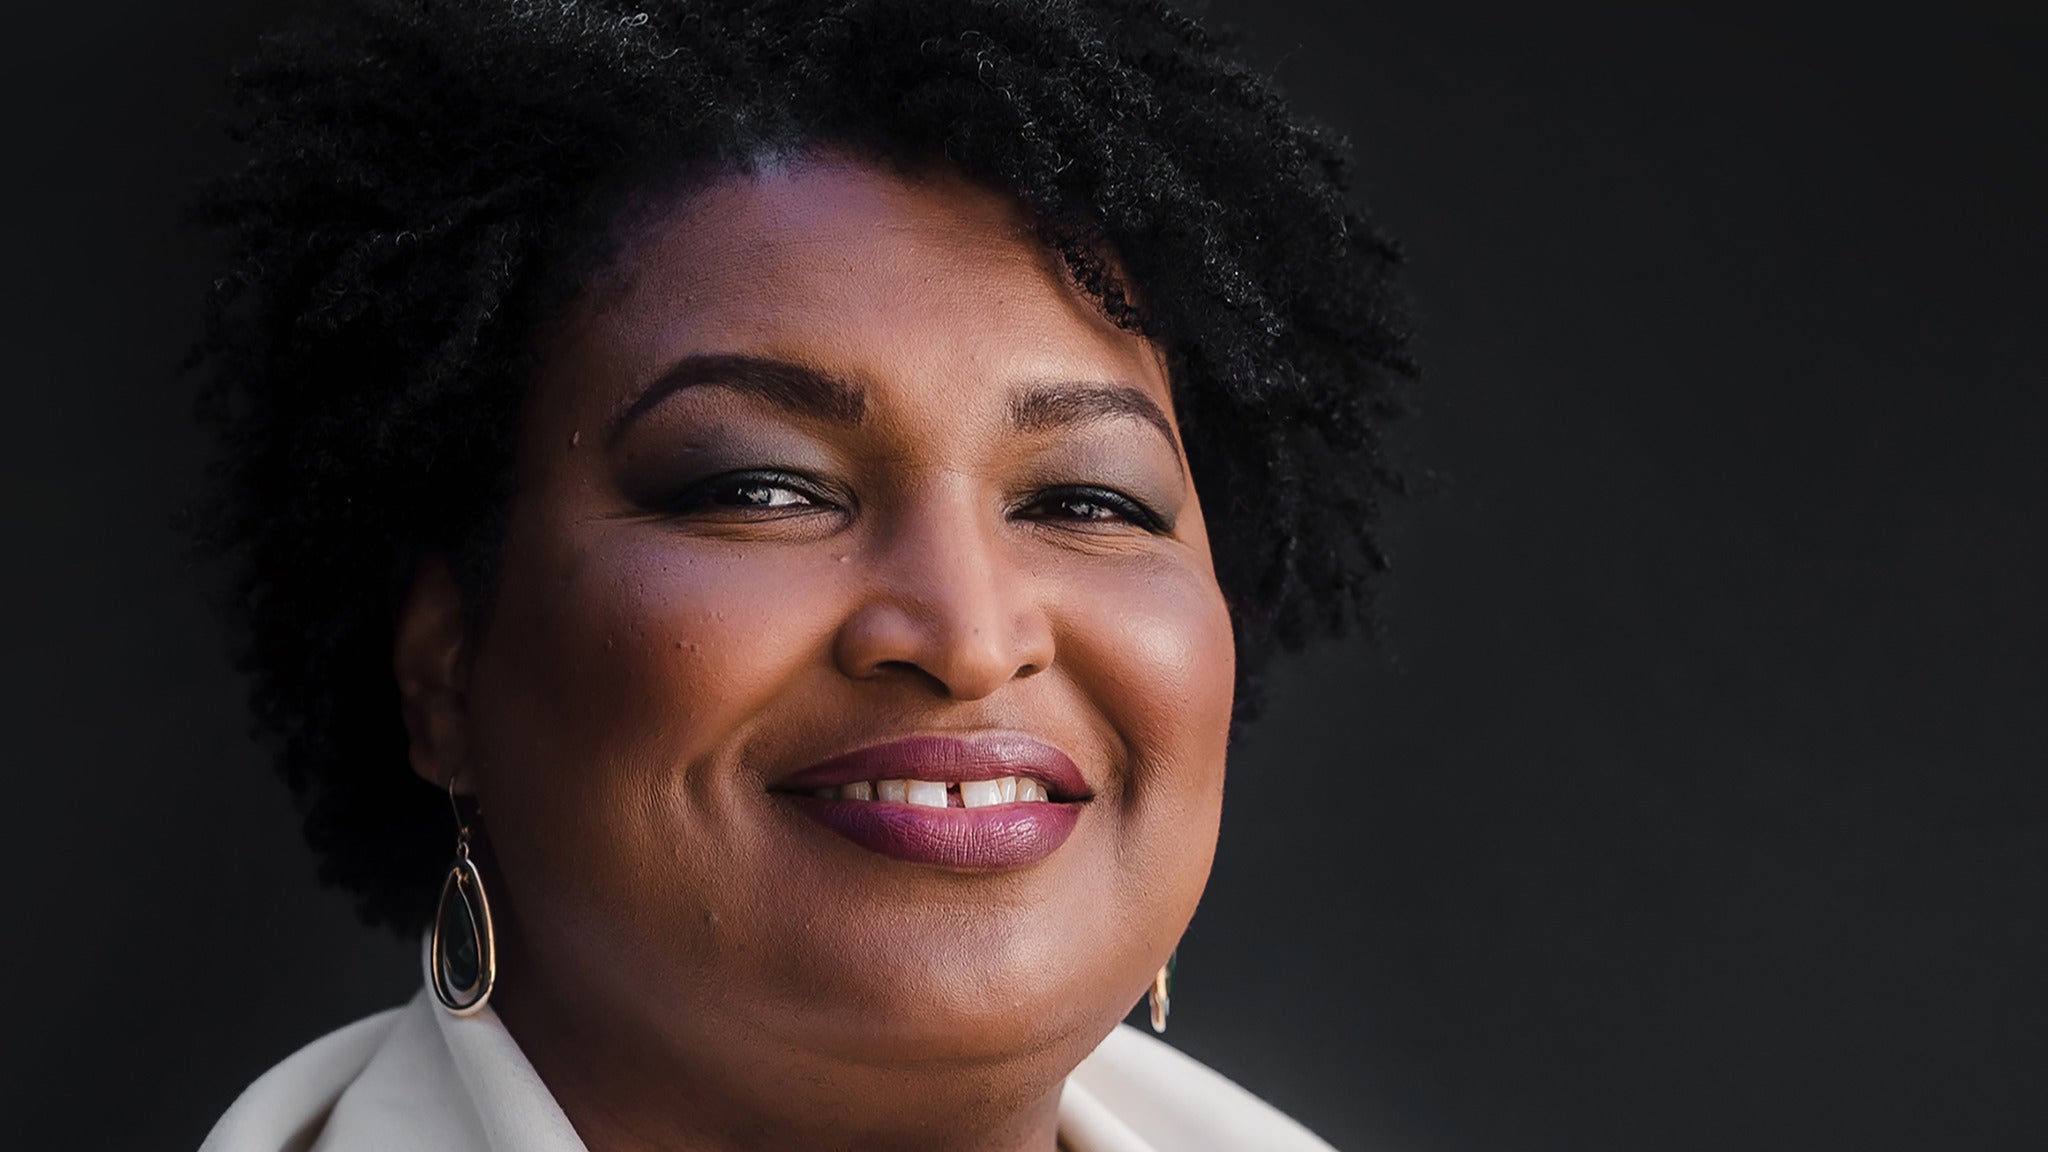 A Conversation with Stacey Abrams